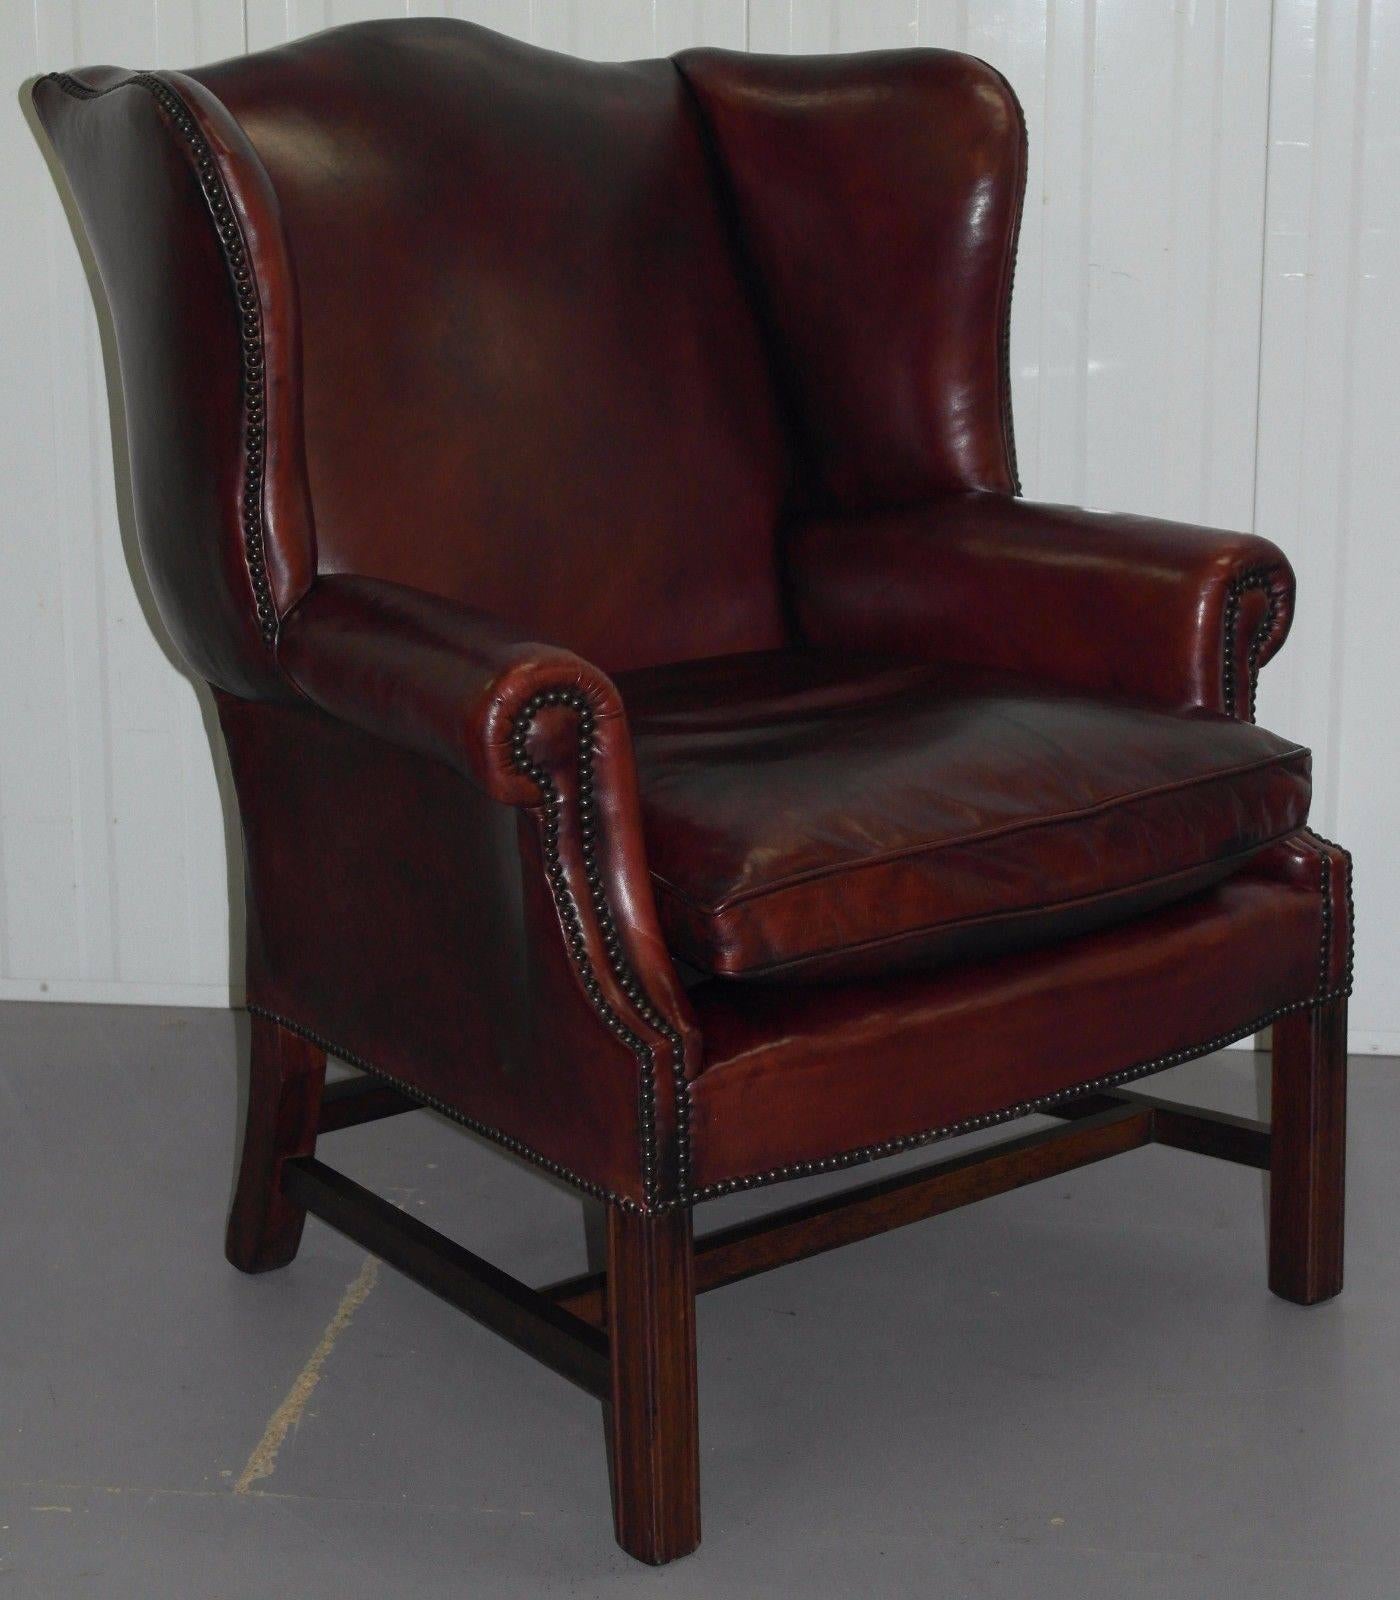 We are delighted to offer for sale this stunning handmade in Bath hand dyed aged oxblood leather wide Georgian wingback armchair

This armchair is part of a suite, we have one of these, a pair of footstools, a pair of leather oxblood wingback